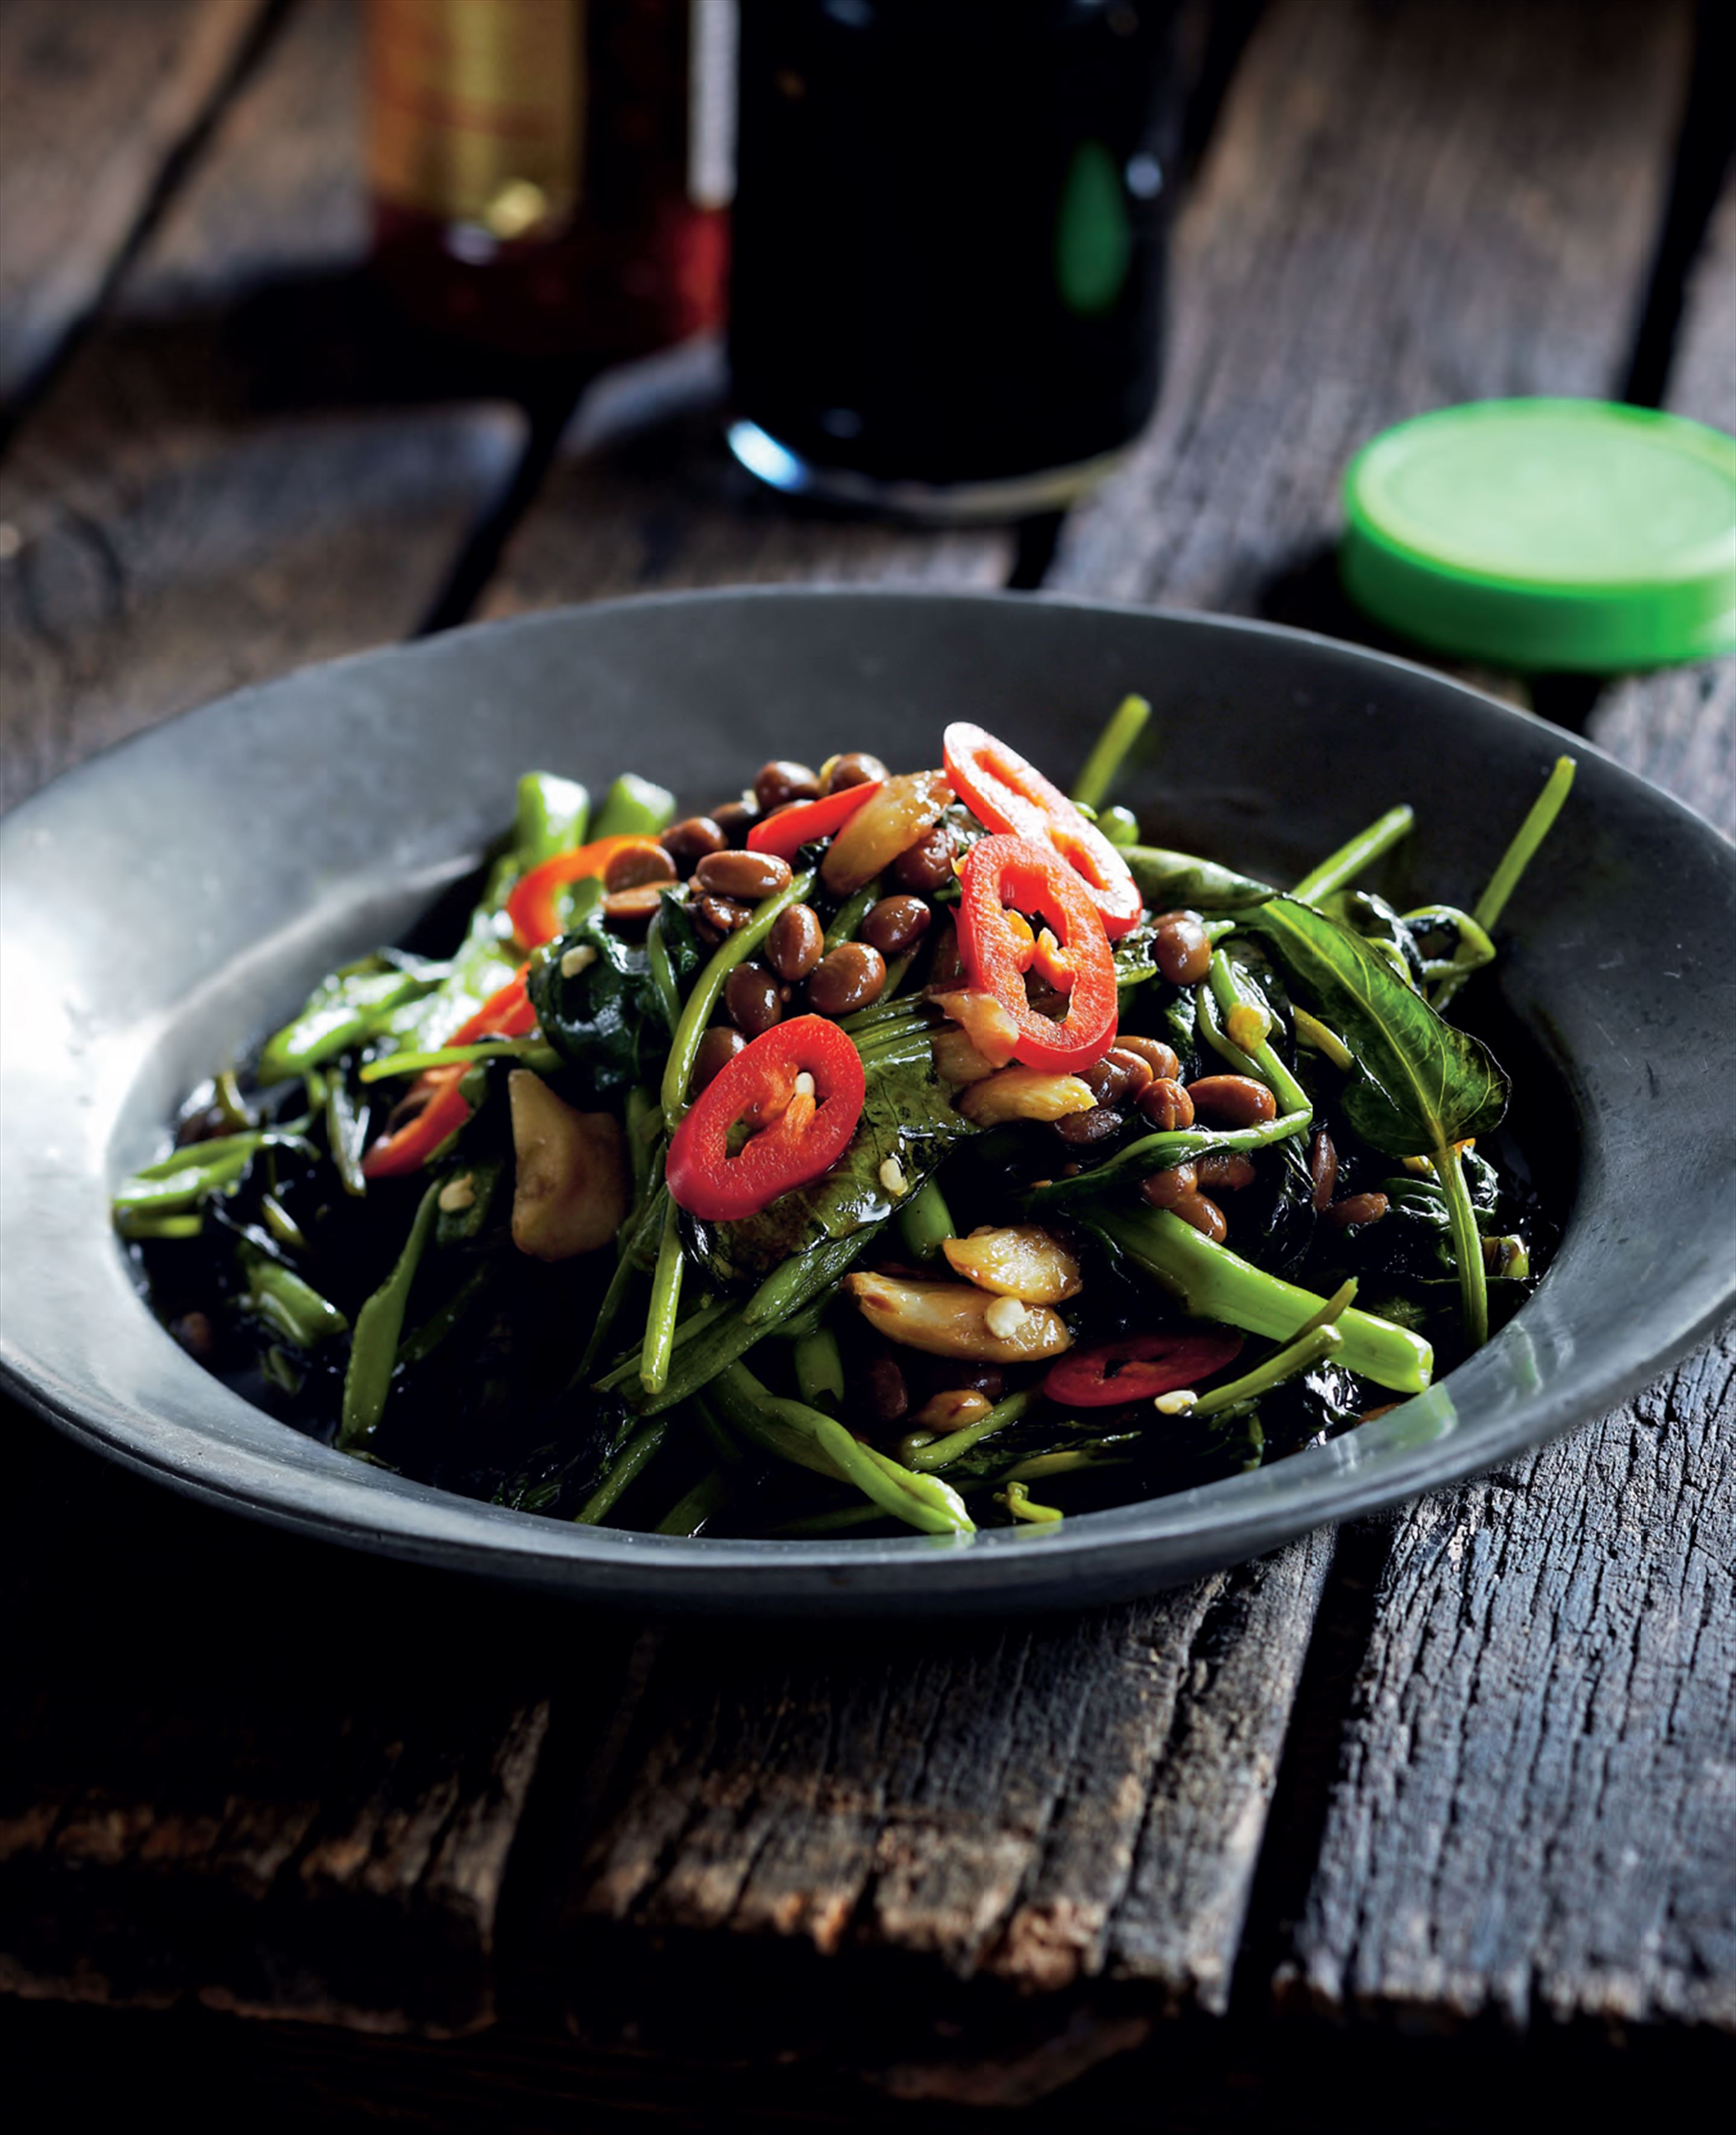 Water spinach with fermented soya beans